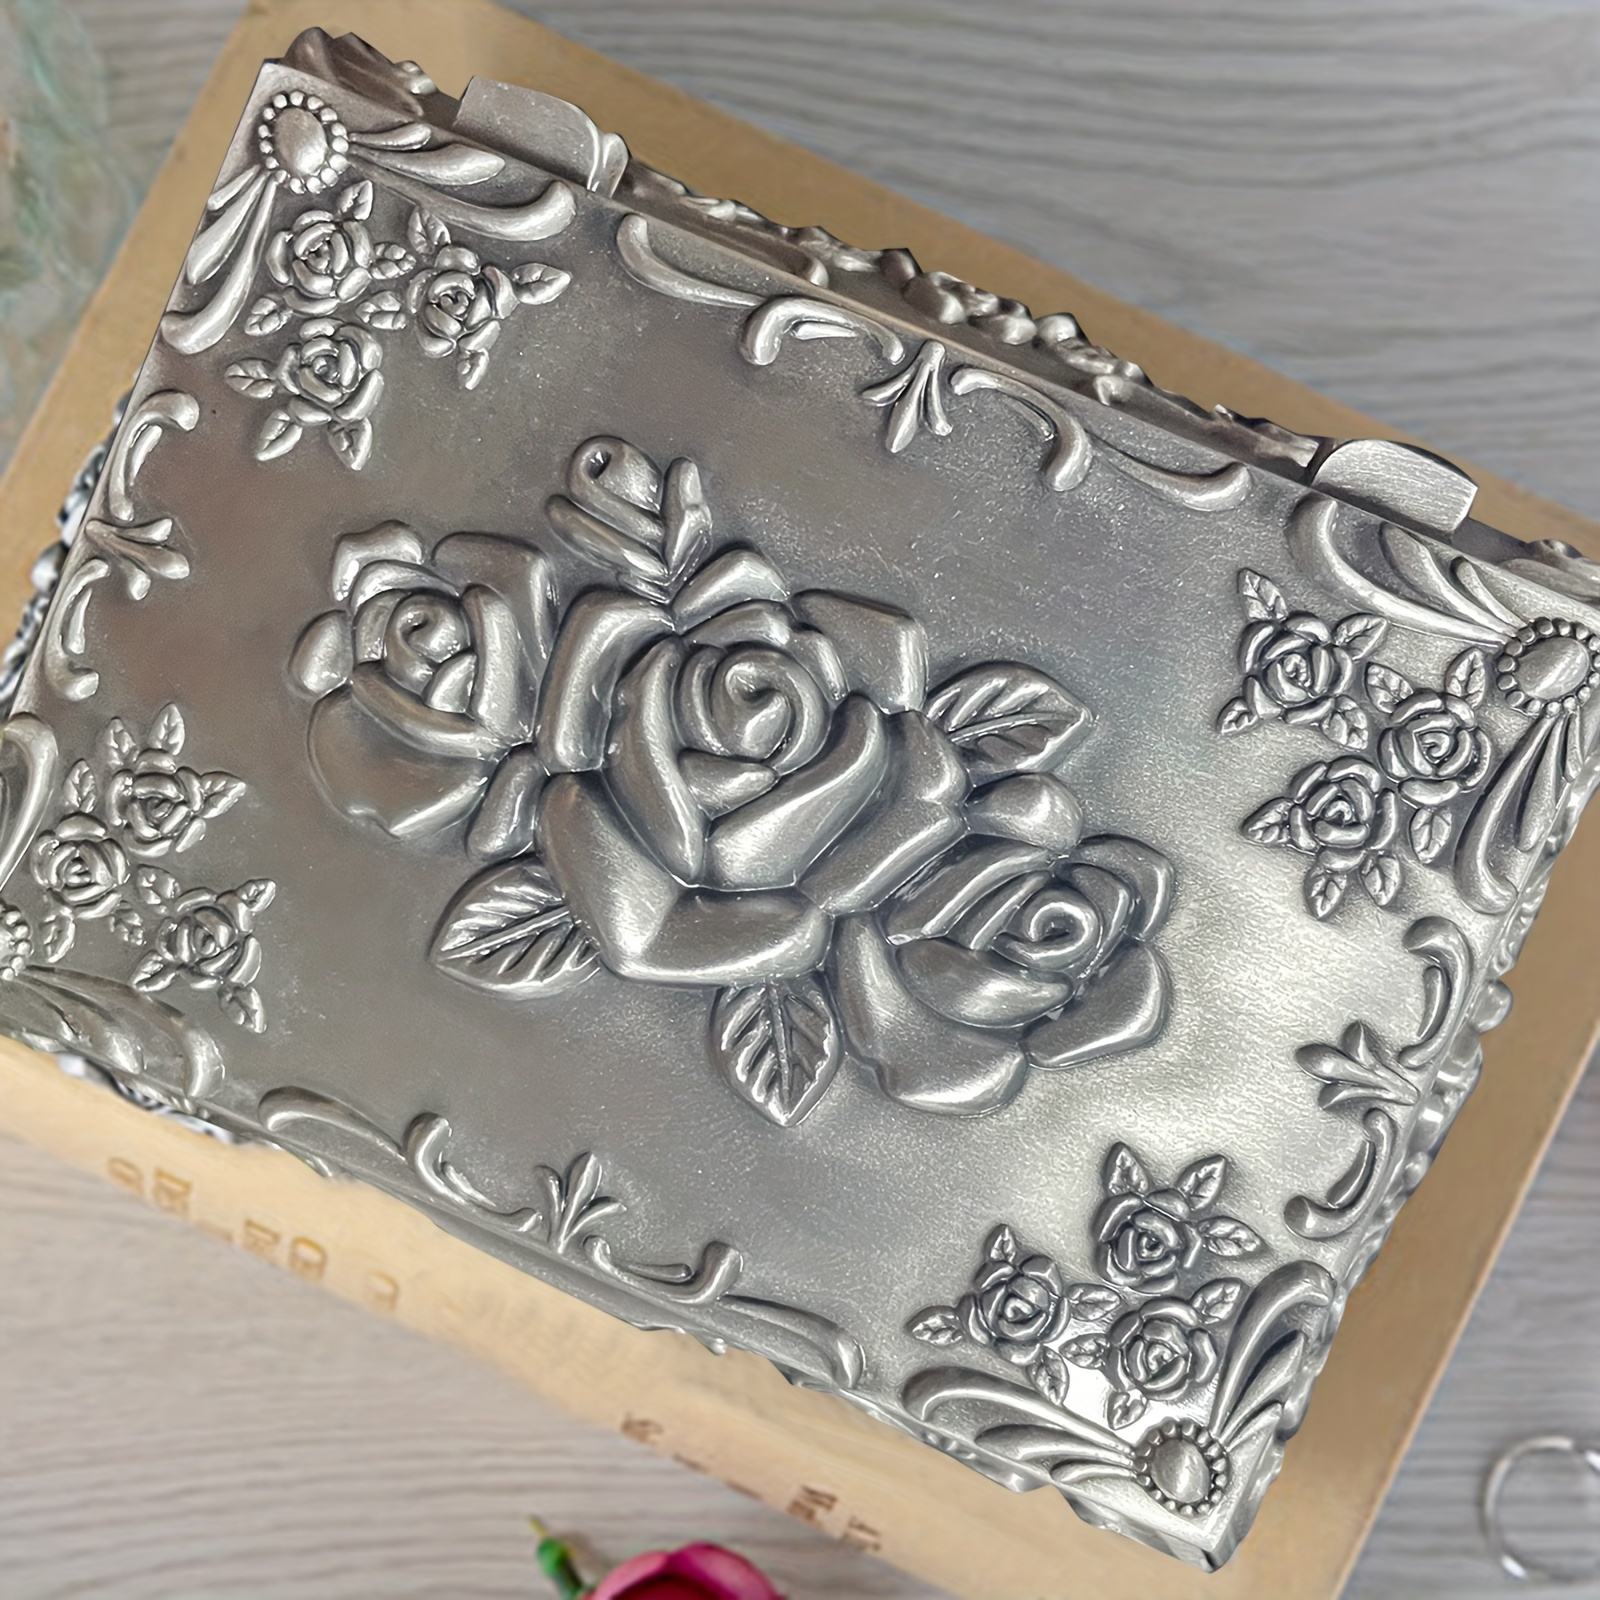 Vintage Copper Jewellery Storage Box With Floral Engraving